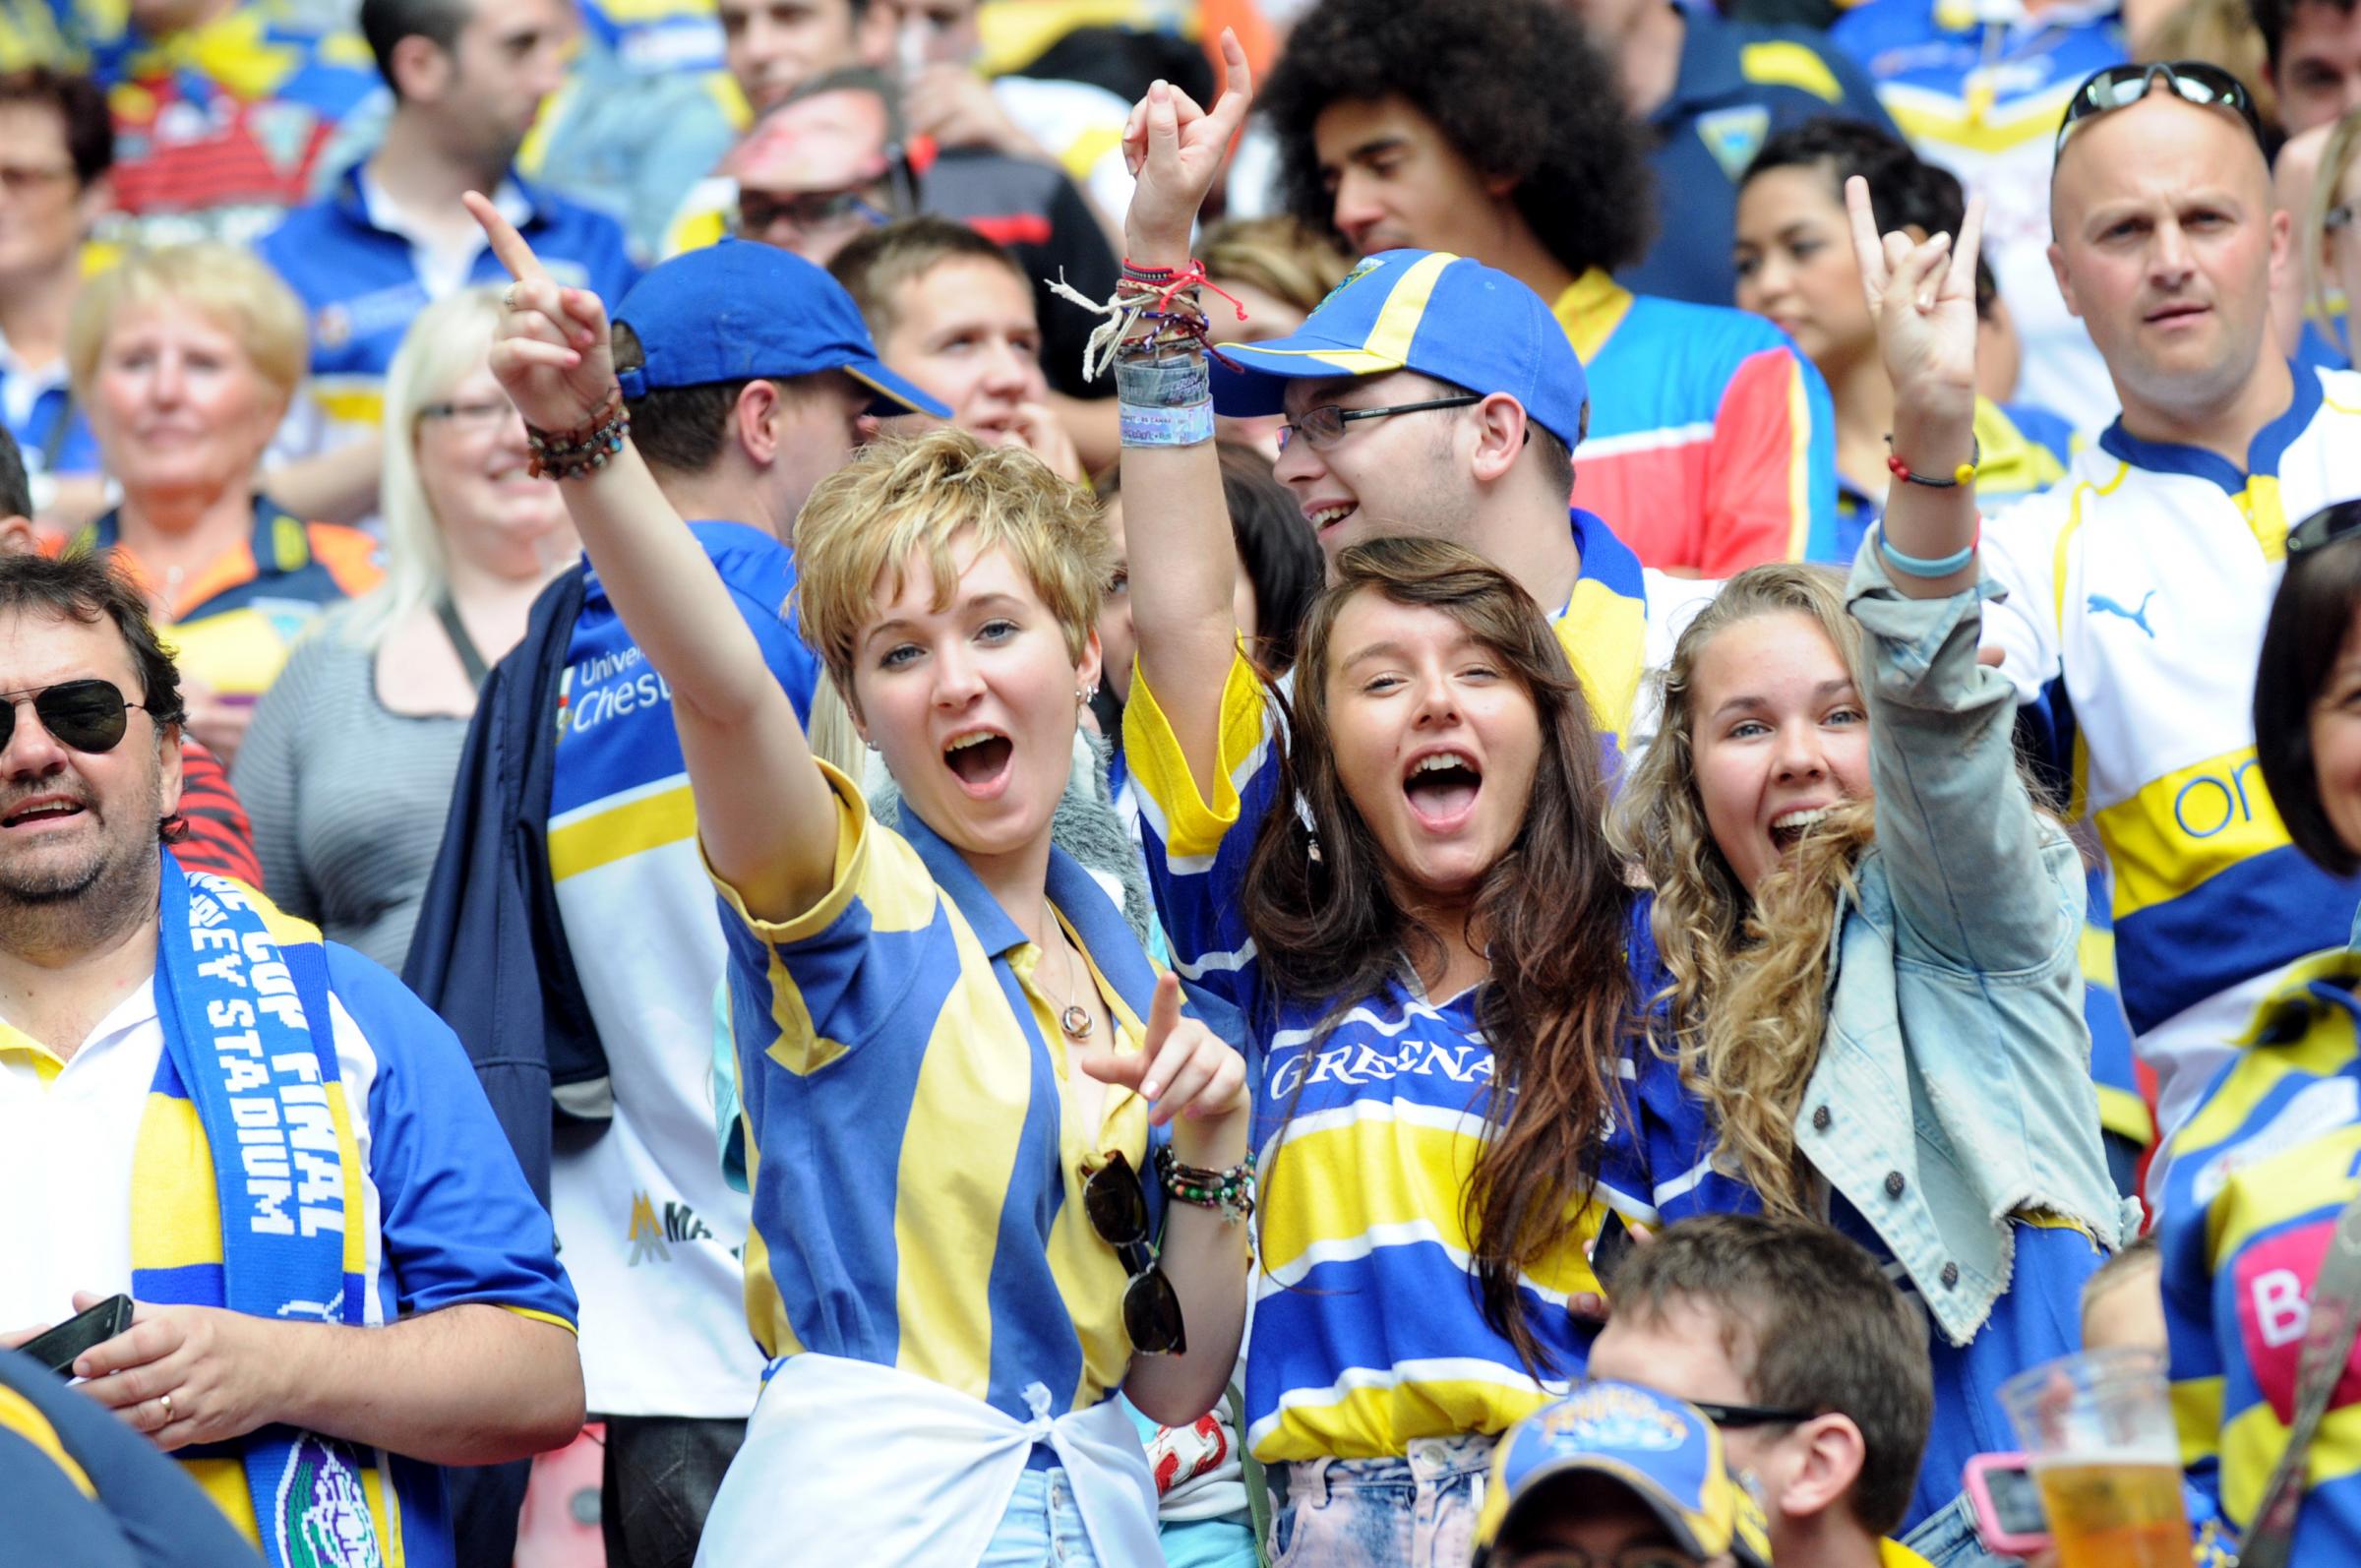 Warrington Wolves fans at Wembley for the Challenge Cup Final success against Leeds Rhinos in 2012